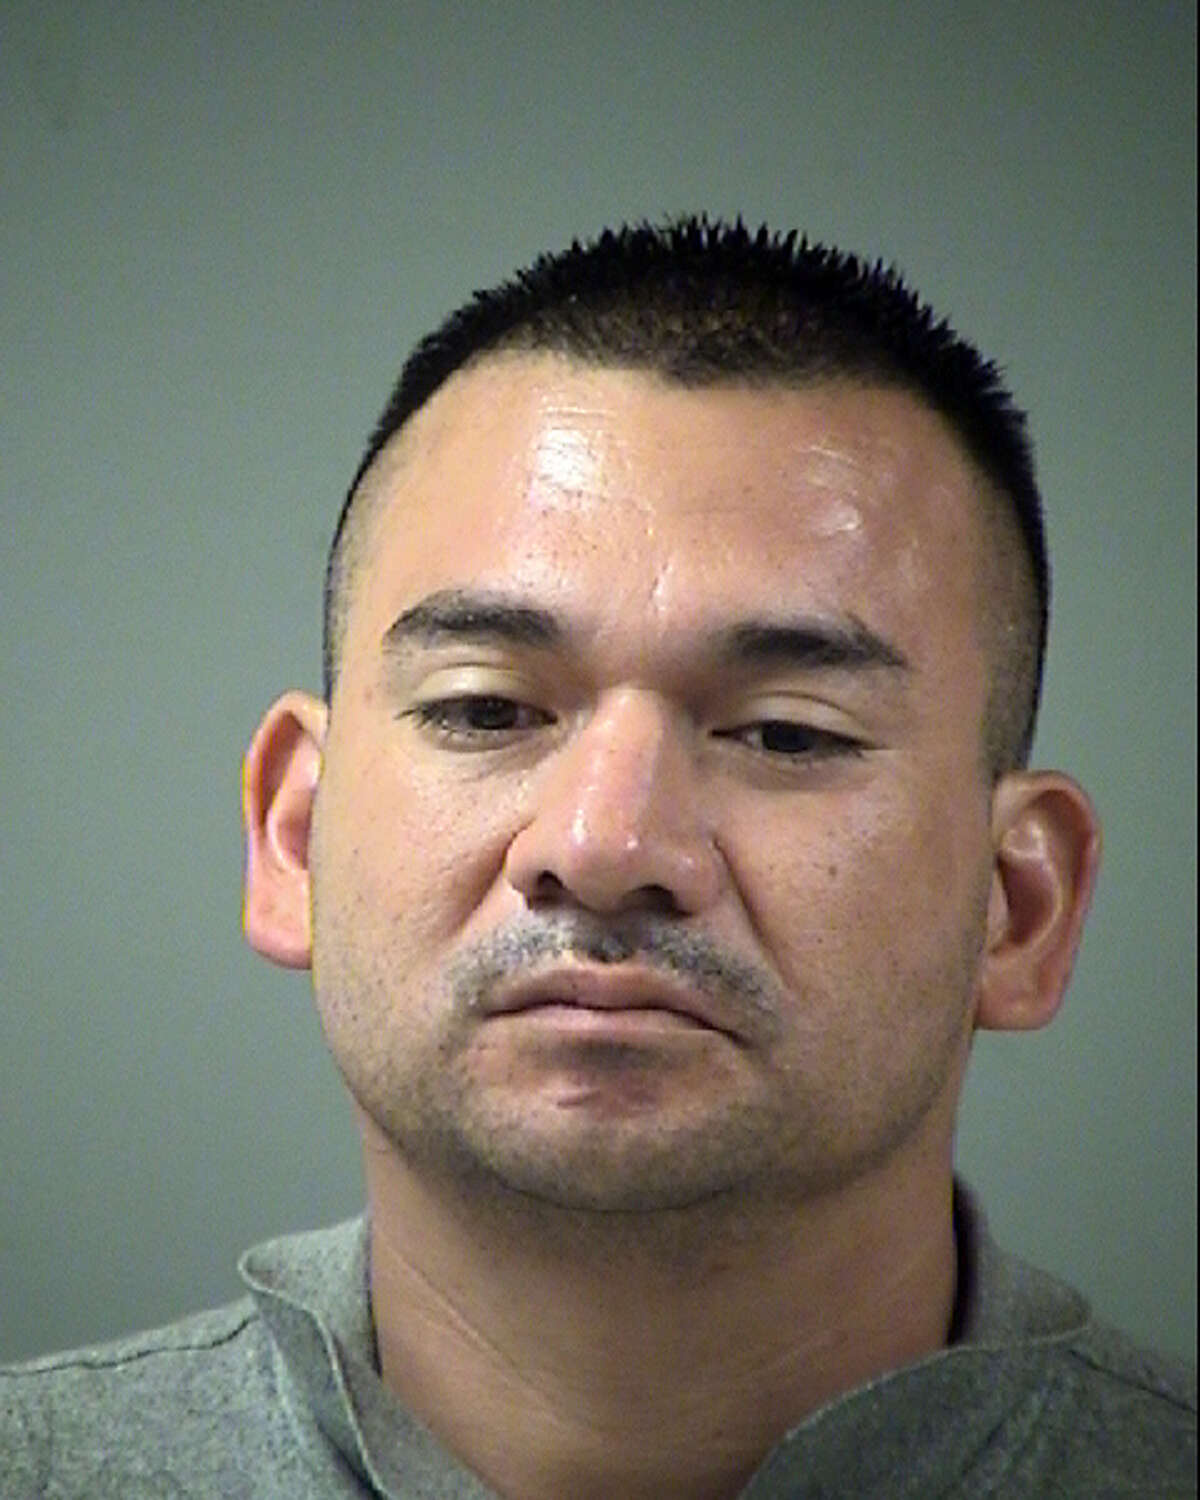 Kenneth Lamicq, 38, is charged with theft under $2,500 - enhanced.